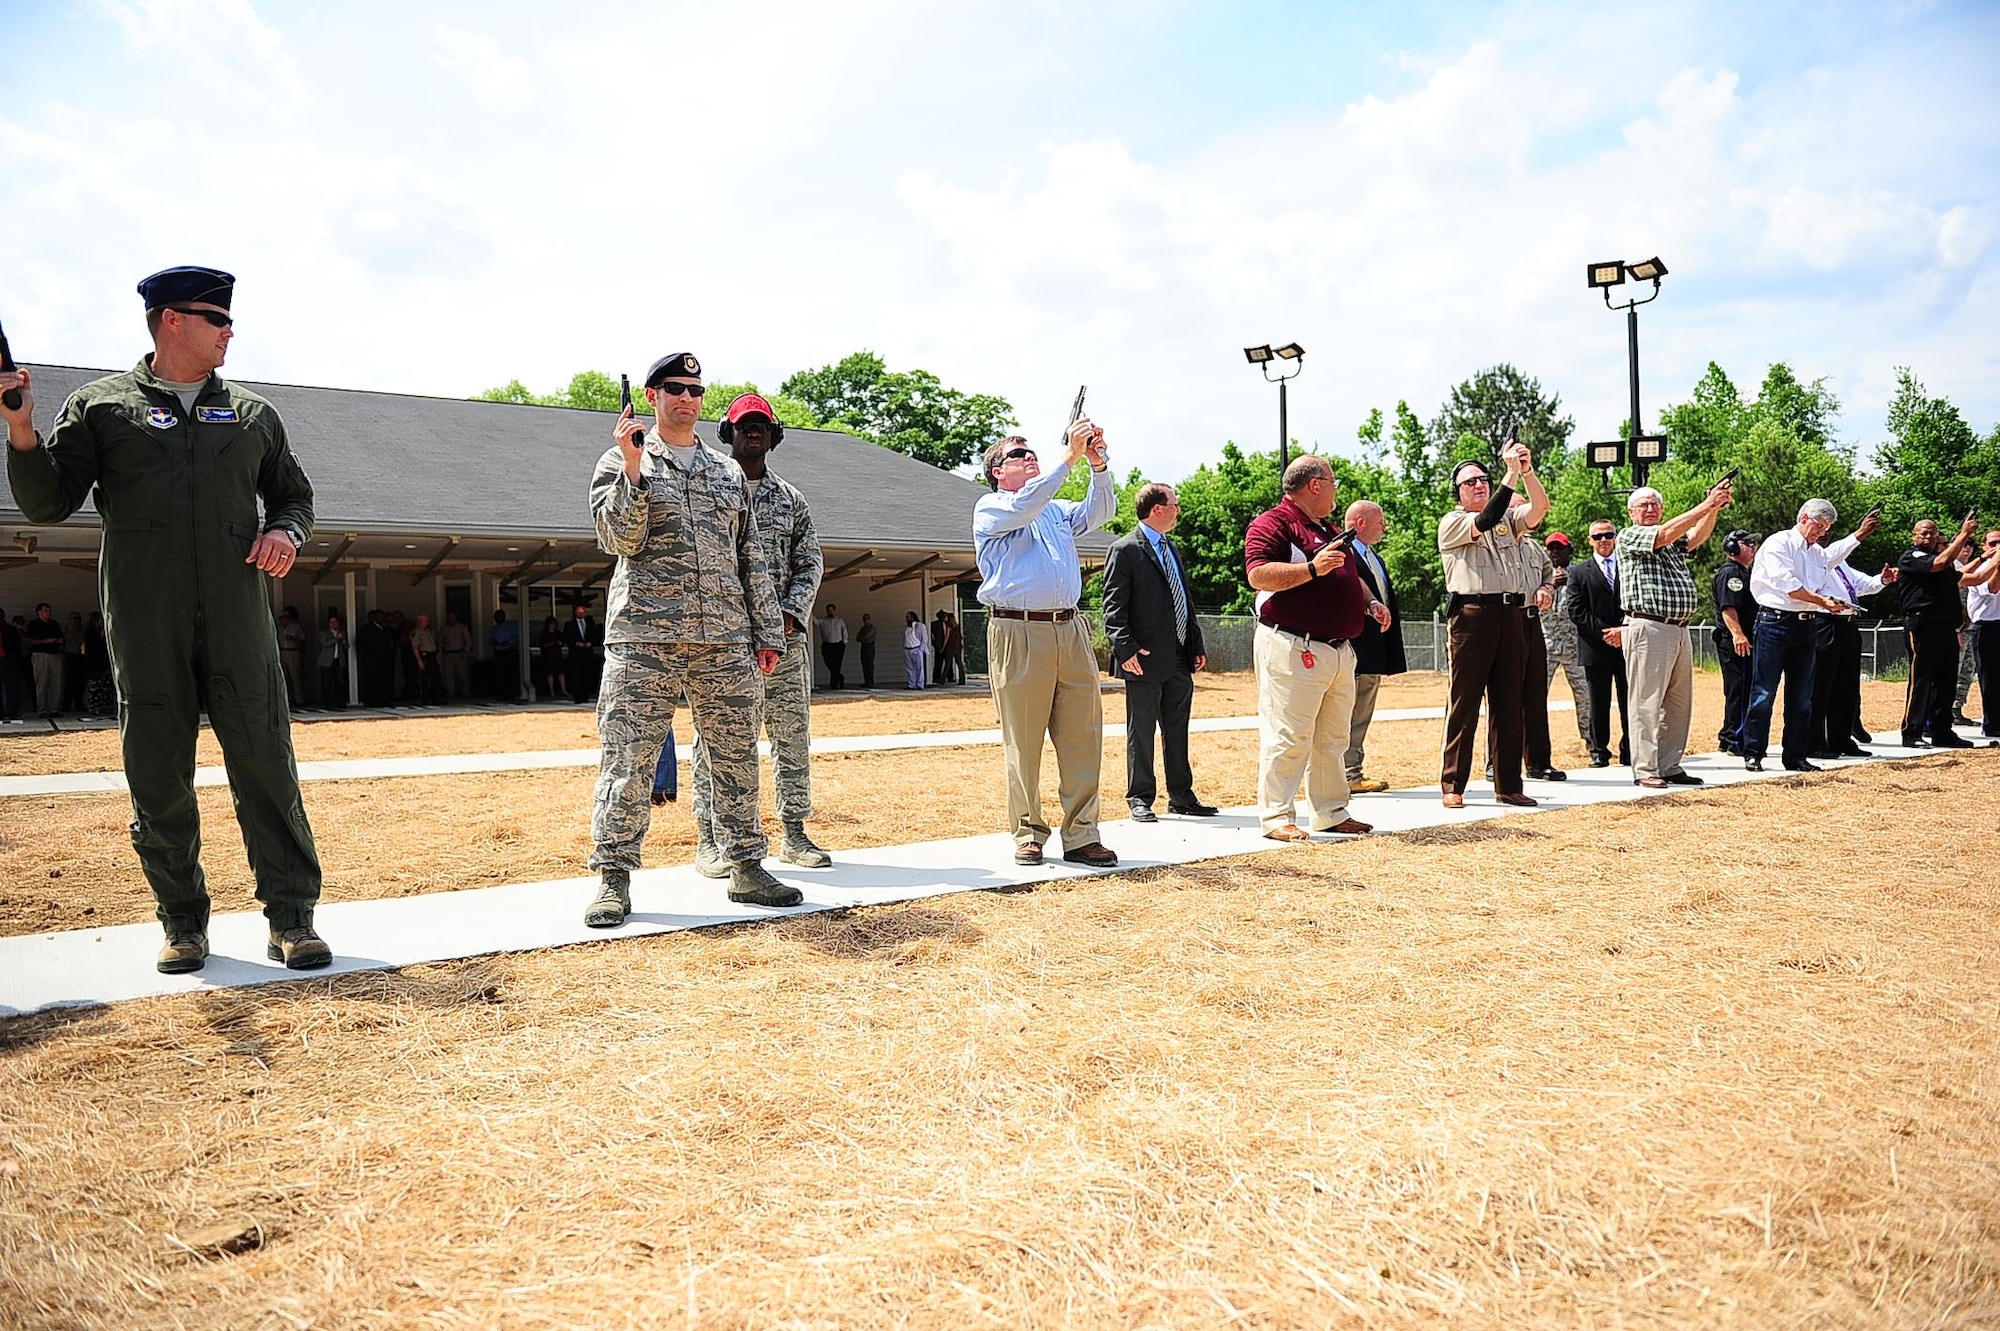 Col. John Nichols, 14th Flying Training Wing Commander, and Maj. Brenton Pickrell, 14th Security Forces Squadron Commander, lead a line of 14 shooters to officially open the Columbus Lowndes County Small Arms Range May 8 in Lowndes County, Mississippi. Distinguished shooters included Mississippi Governor Phil Bryant and other local community members who contributed to the planning and construction of the $1.9 million facility. (U.S. Air Force photo by Airman Daniel Lile)